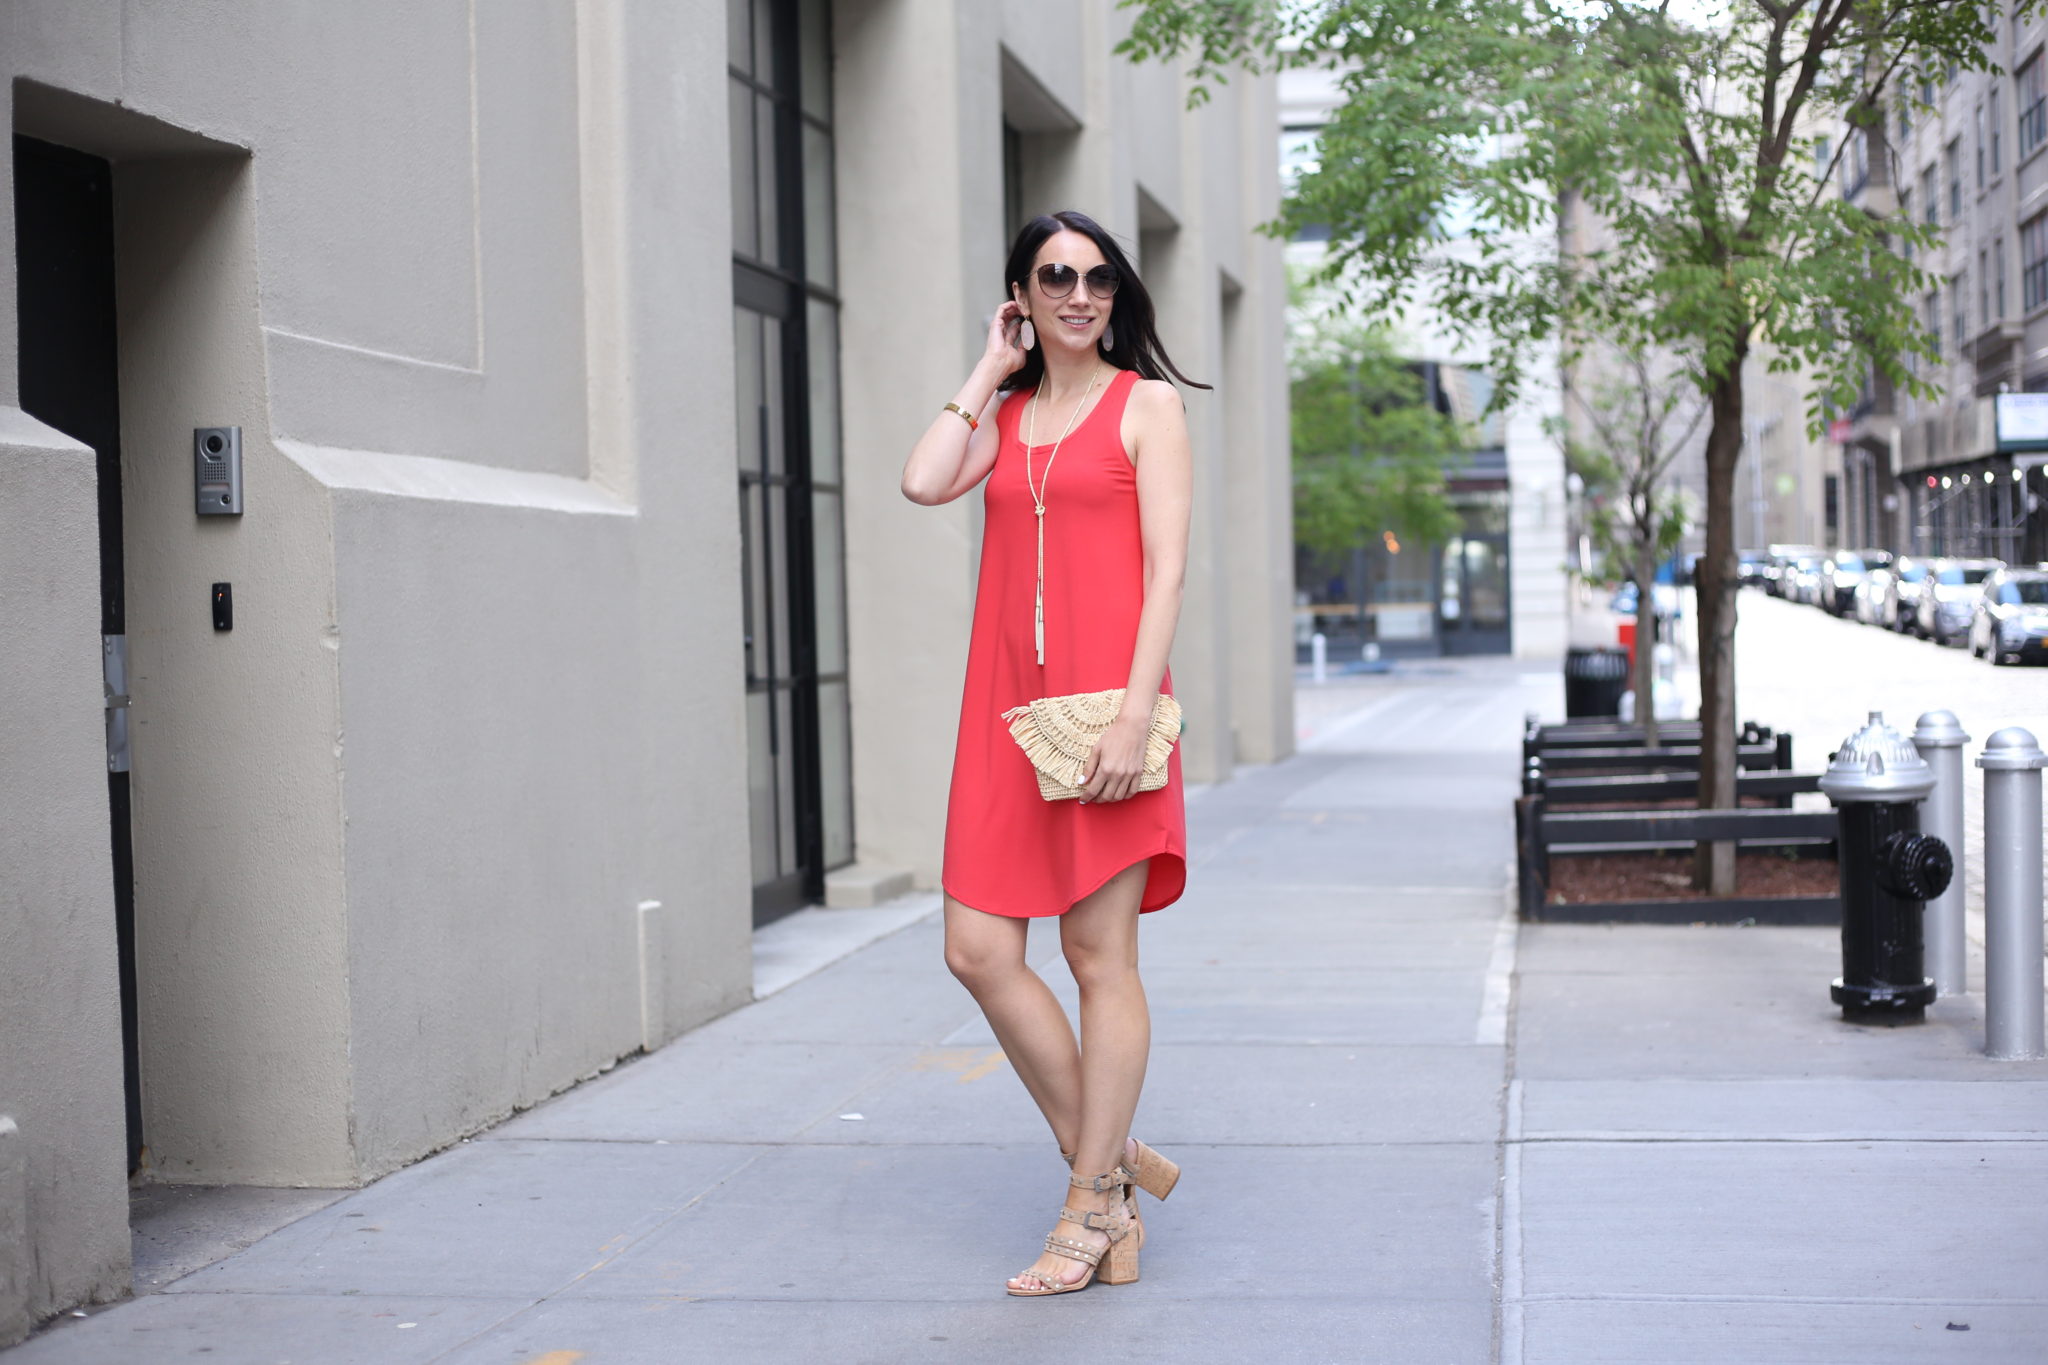 Date Night Outfit – Tank Dress & Strappy Sandals